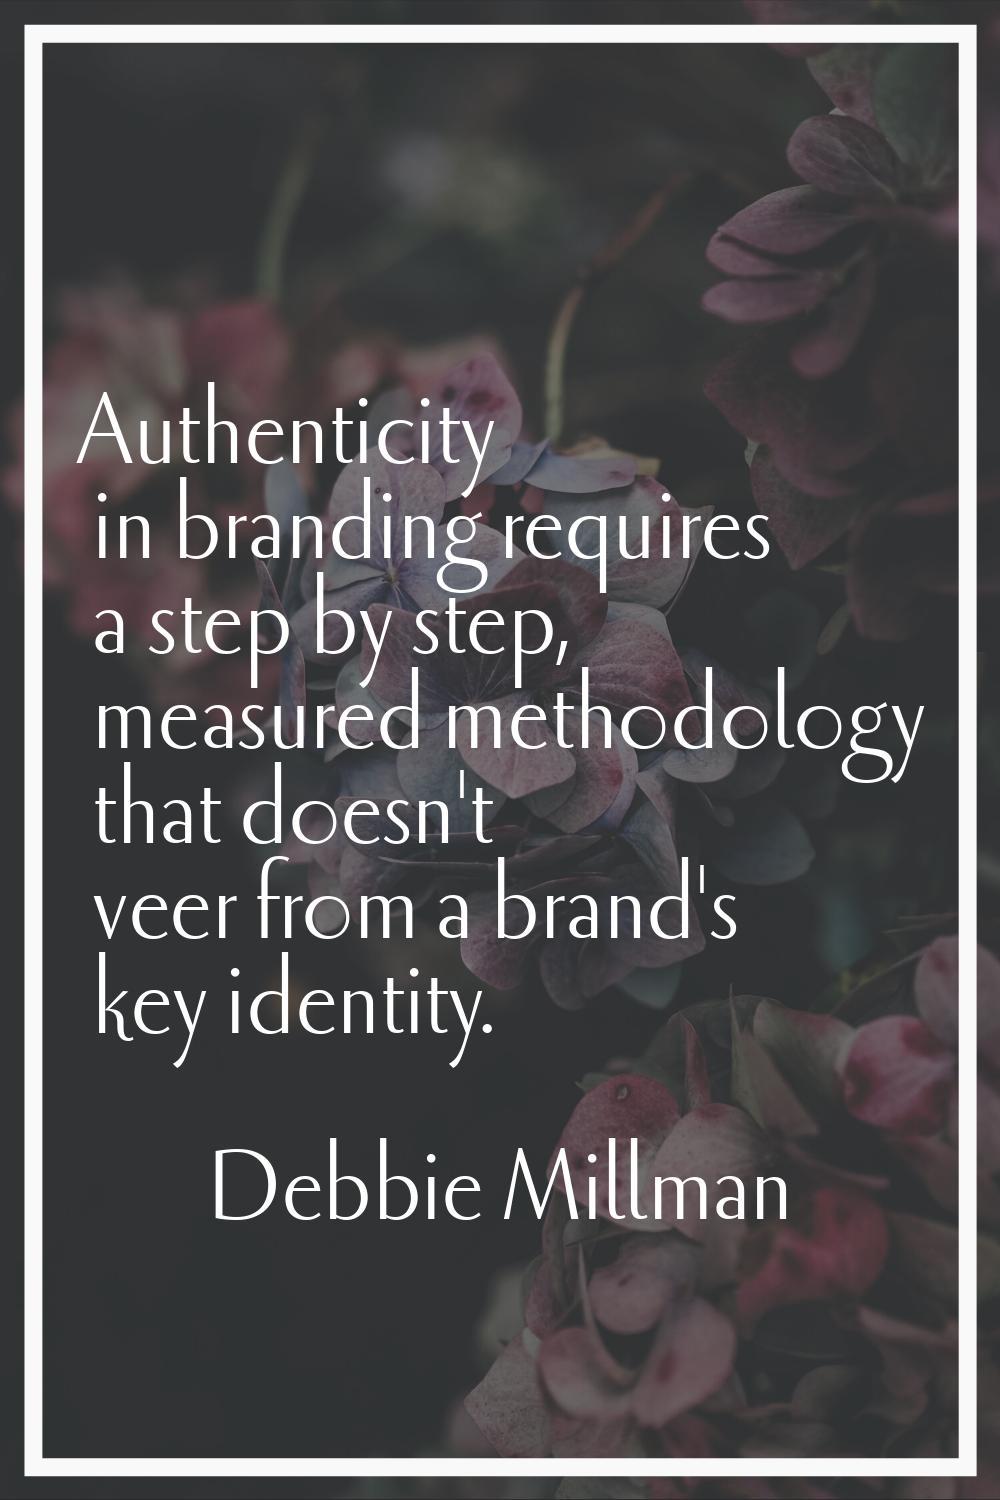 Authenticity in branding requires a step by step, measured methodology that doesn't veer from a bra